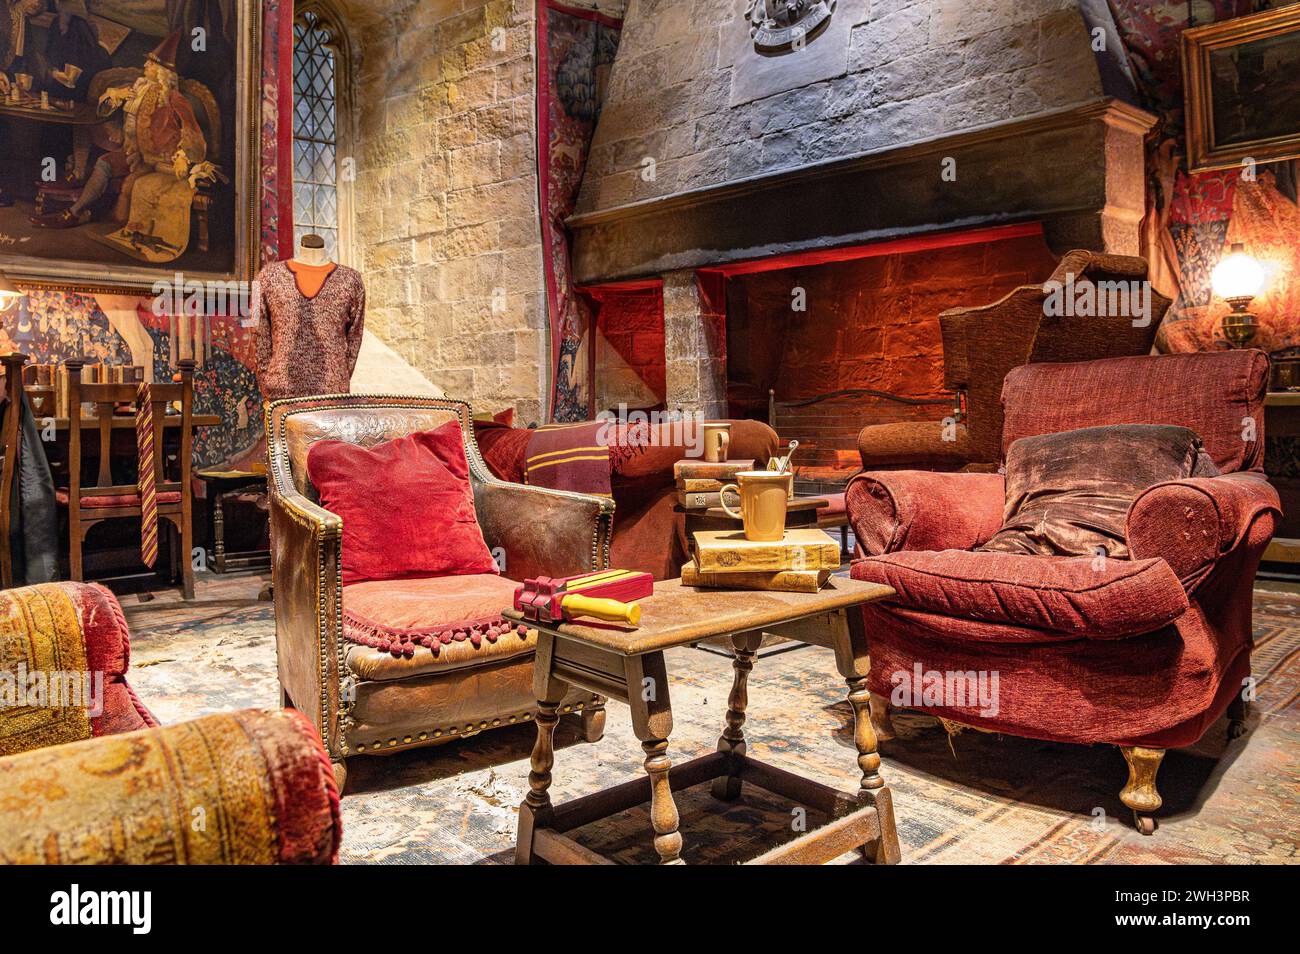 Gryffindor House common room film set at Hogwarts School of Magic at The Making of Harry Potter Studio tour, Leavesden, Hertfordshire, England Stock Photo